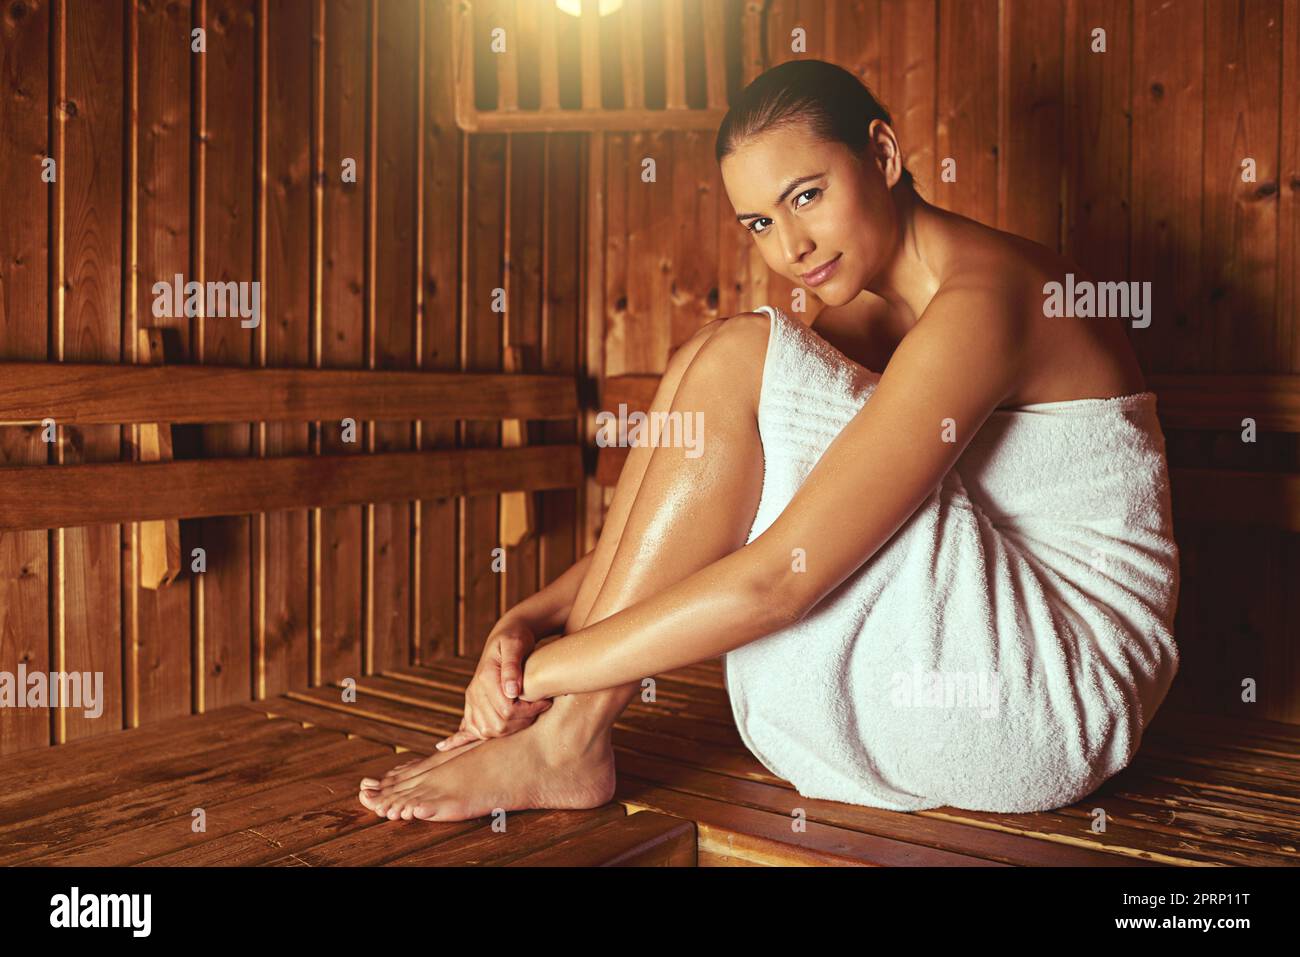 This sauna feels amazing. Full length portrait of a young woman relaxing in the sauna at a spa. Stock Photo